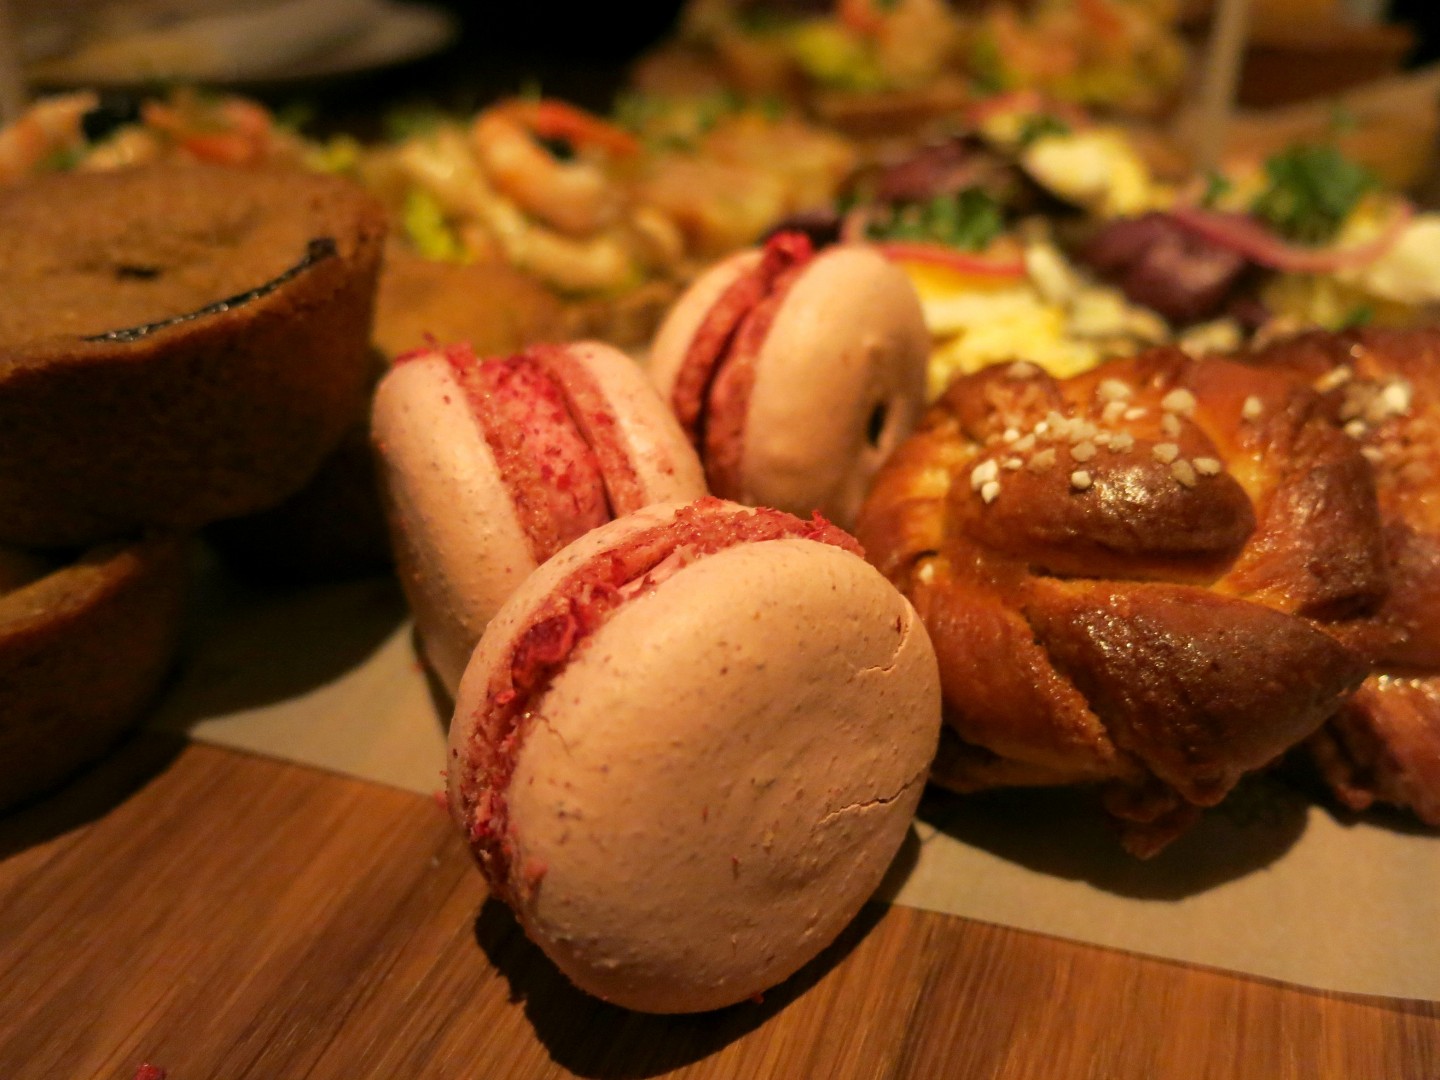 Nordic Afternoon Tea at Aster, Victoria